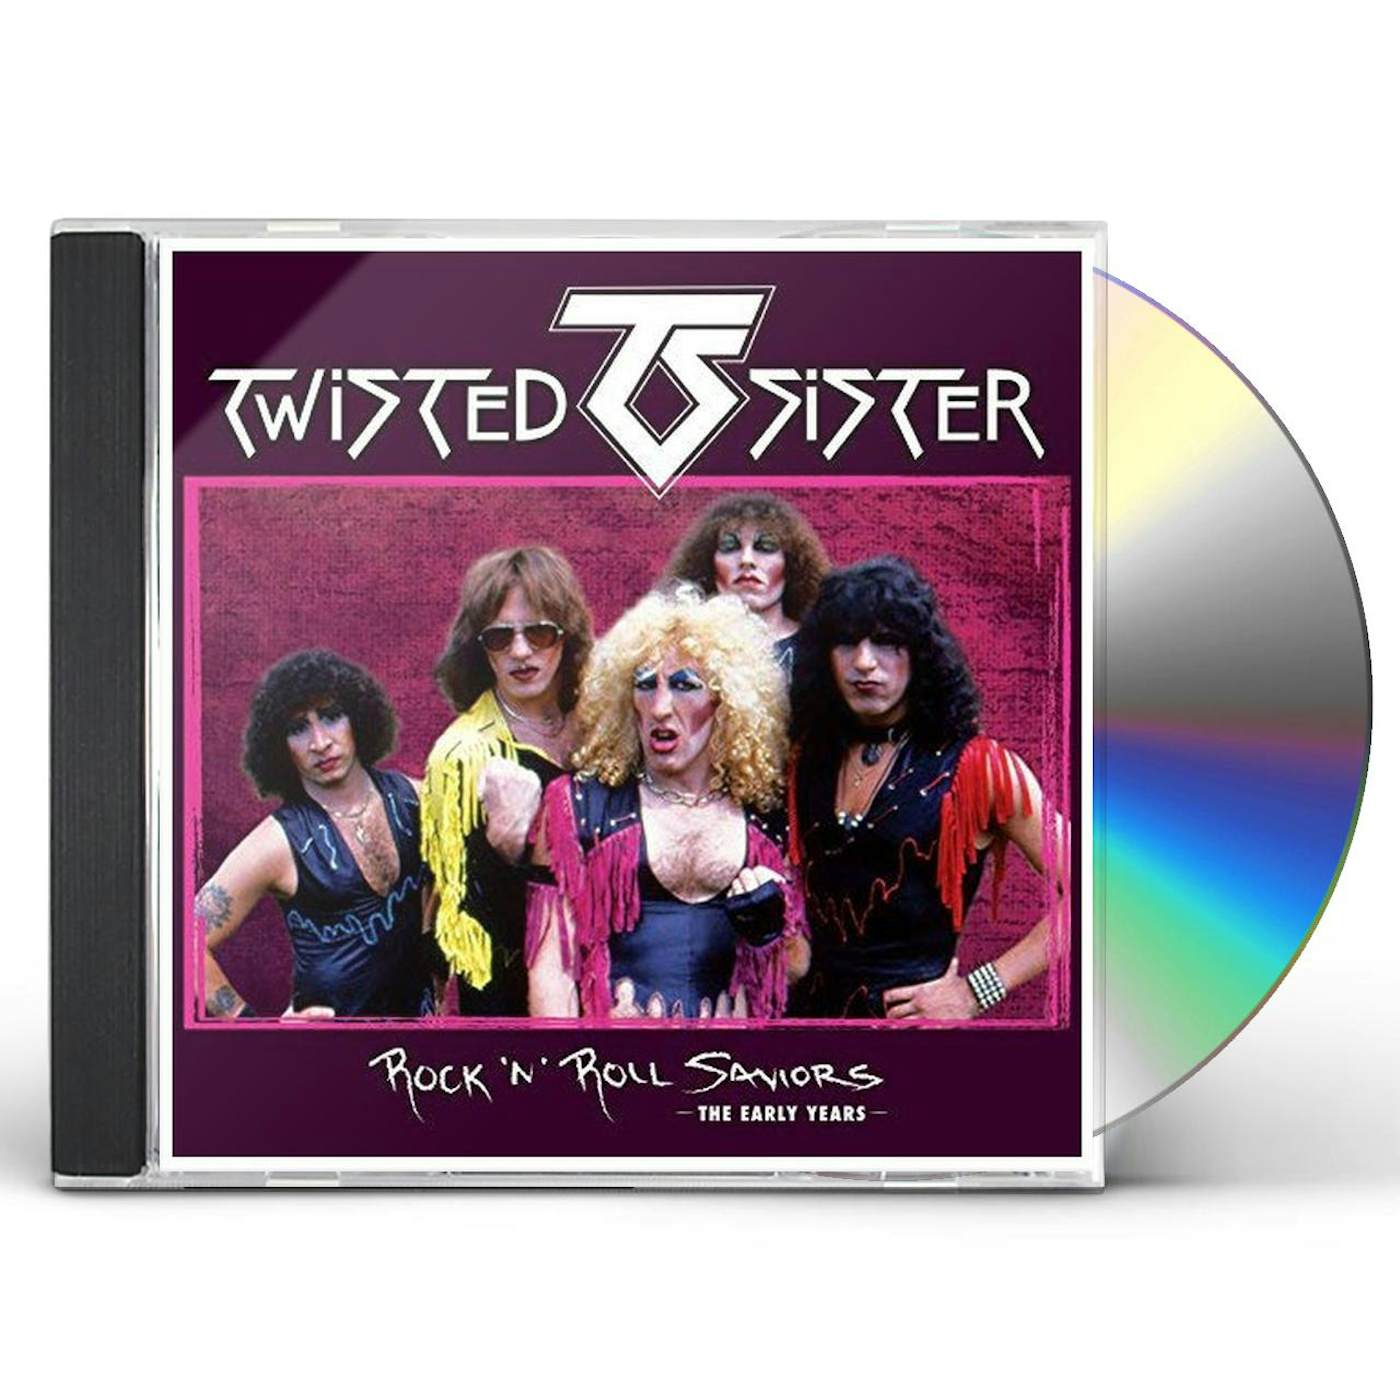 Twisted Sister ROCK 'N' ROLL SAVIORS - THE EARLY YEARS CD